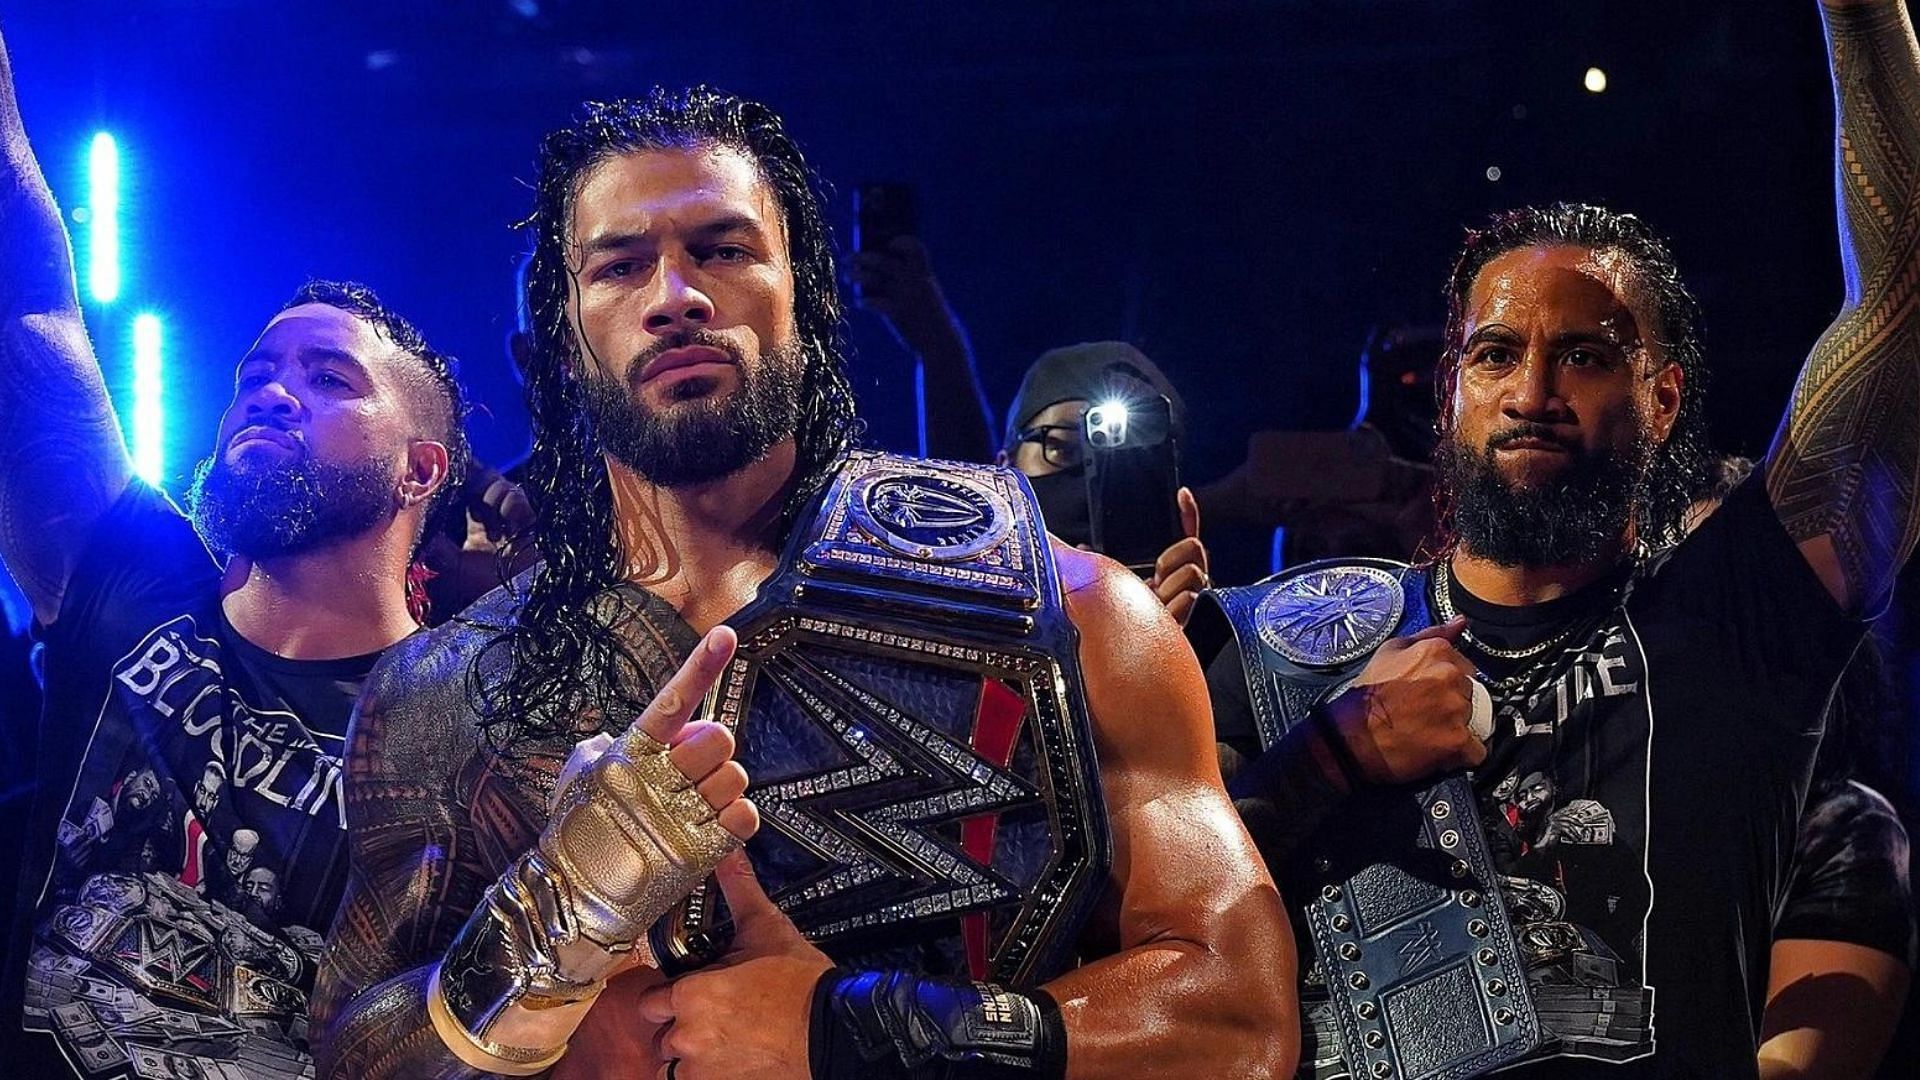 The Bloodline could feature in a six-man tag team match after WrestleMania 39